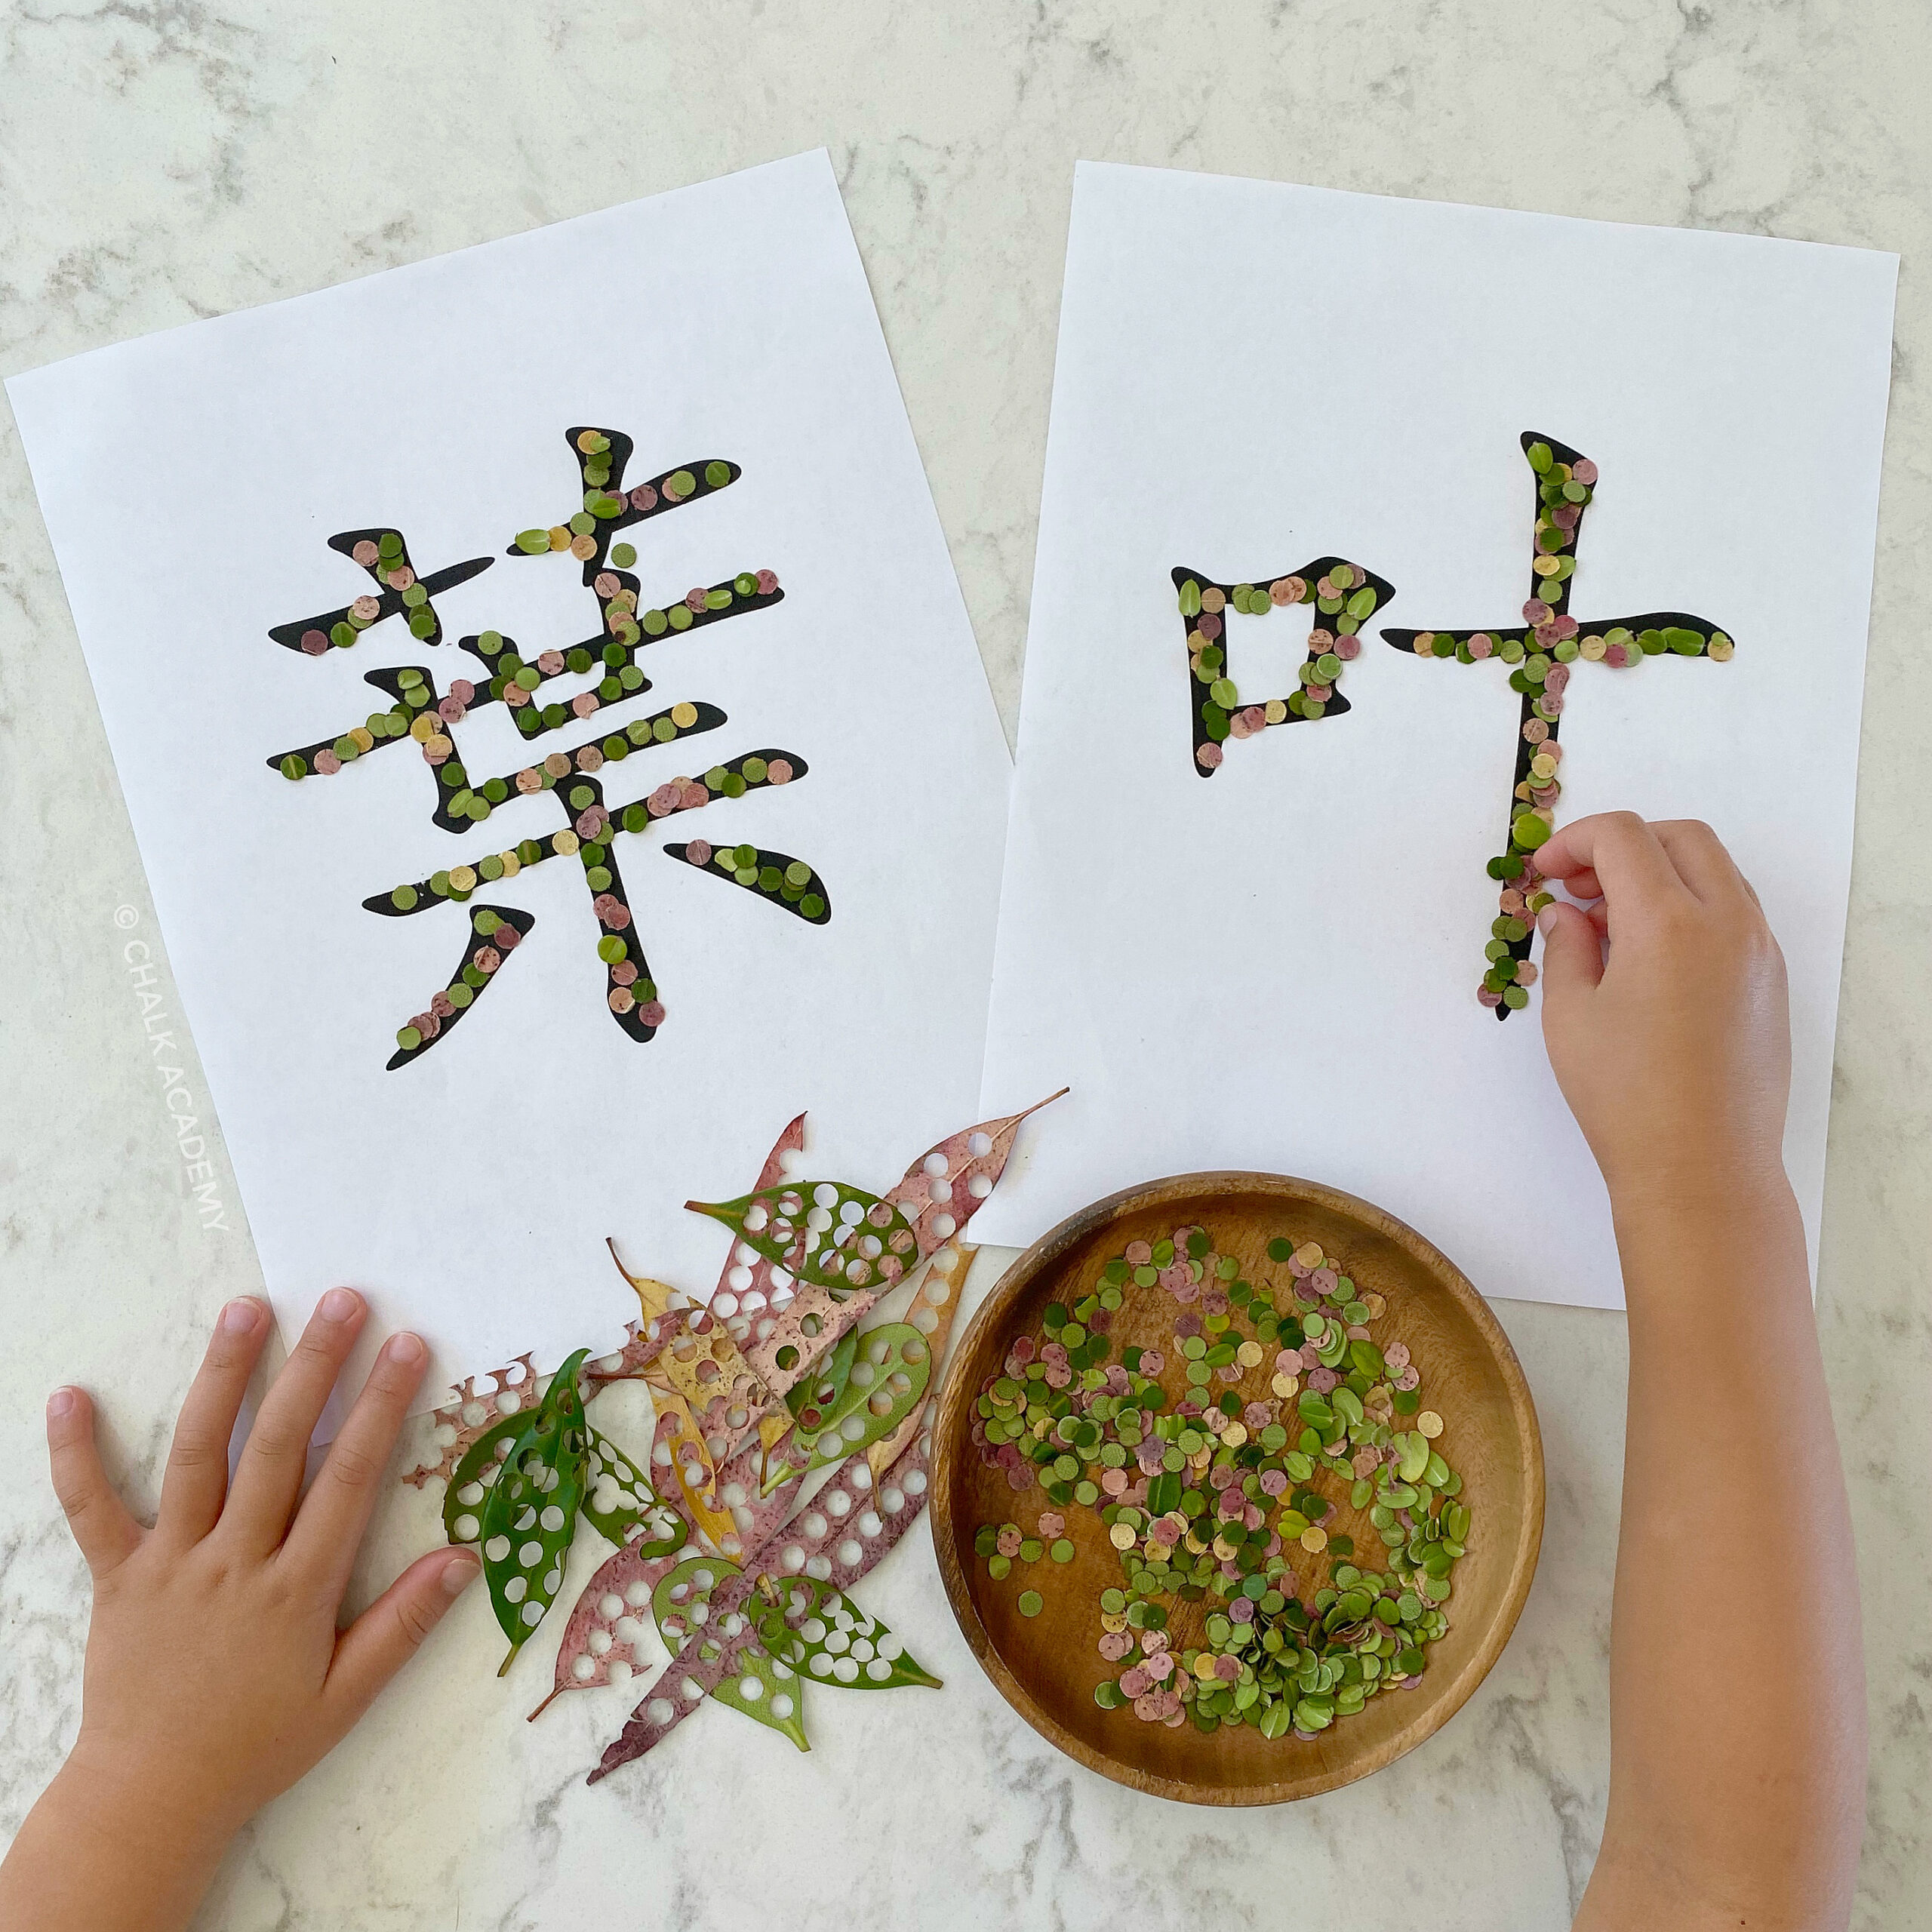 10 Fun and Free Chinese Activities with Leaves